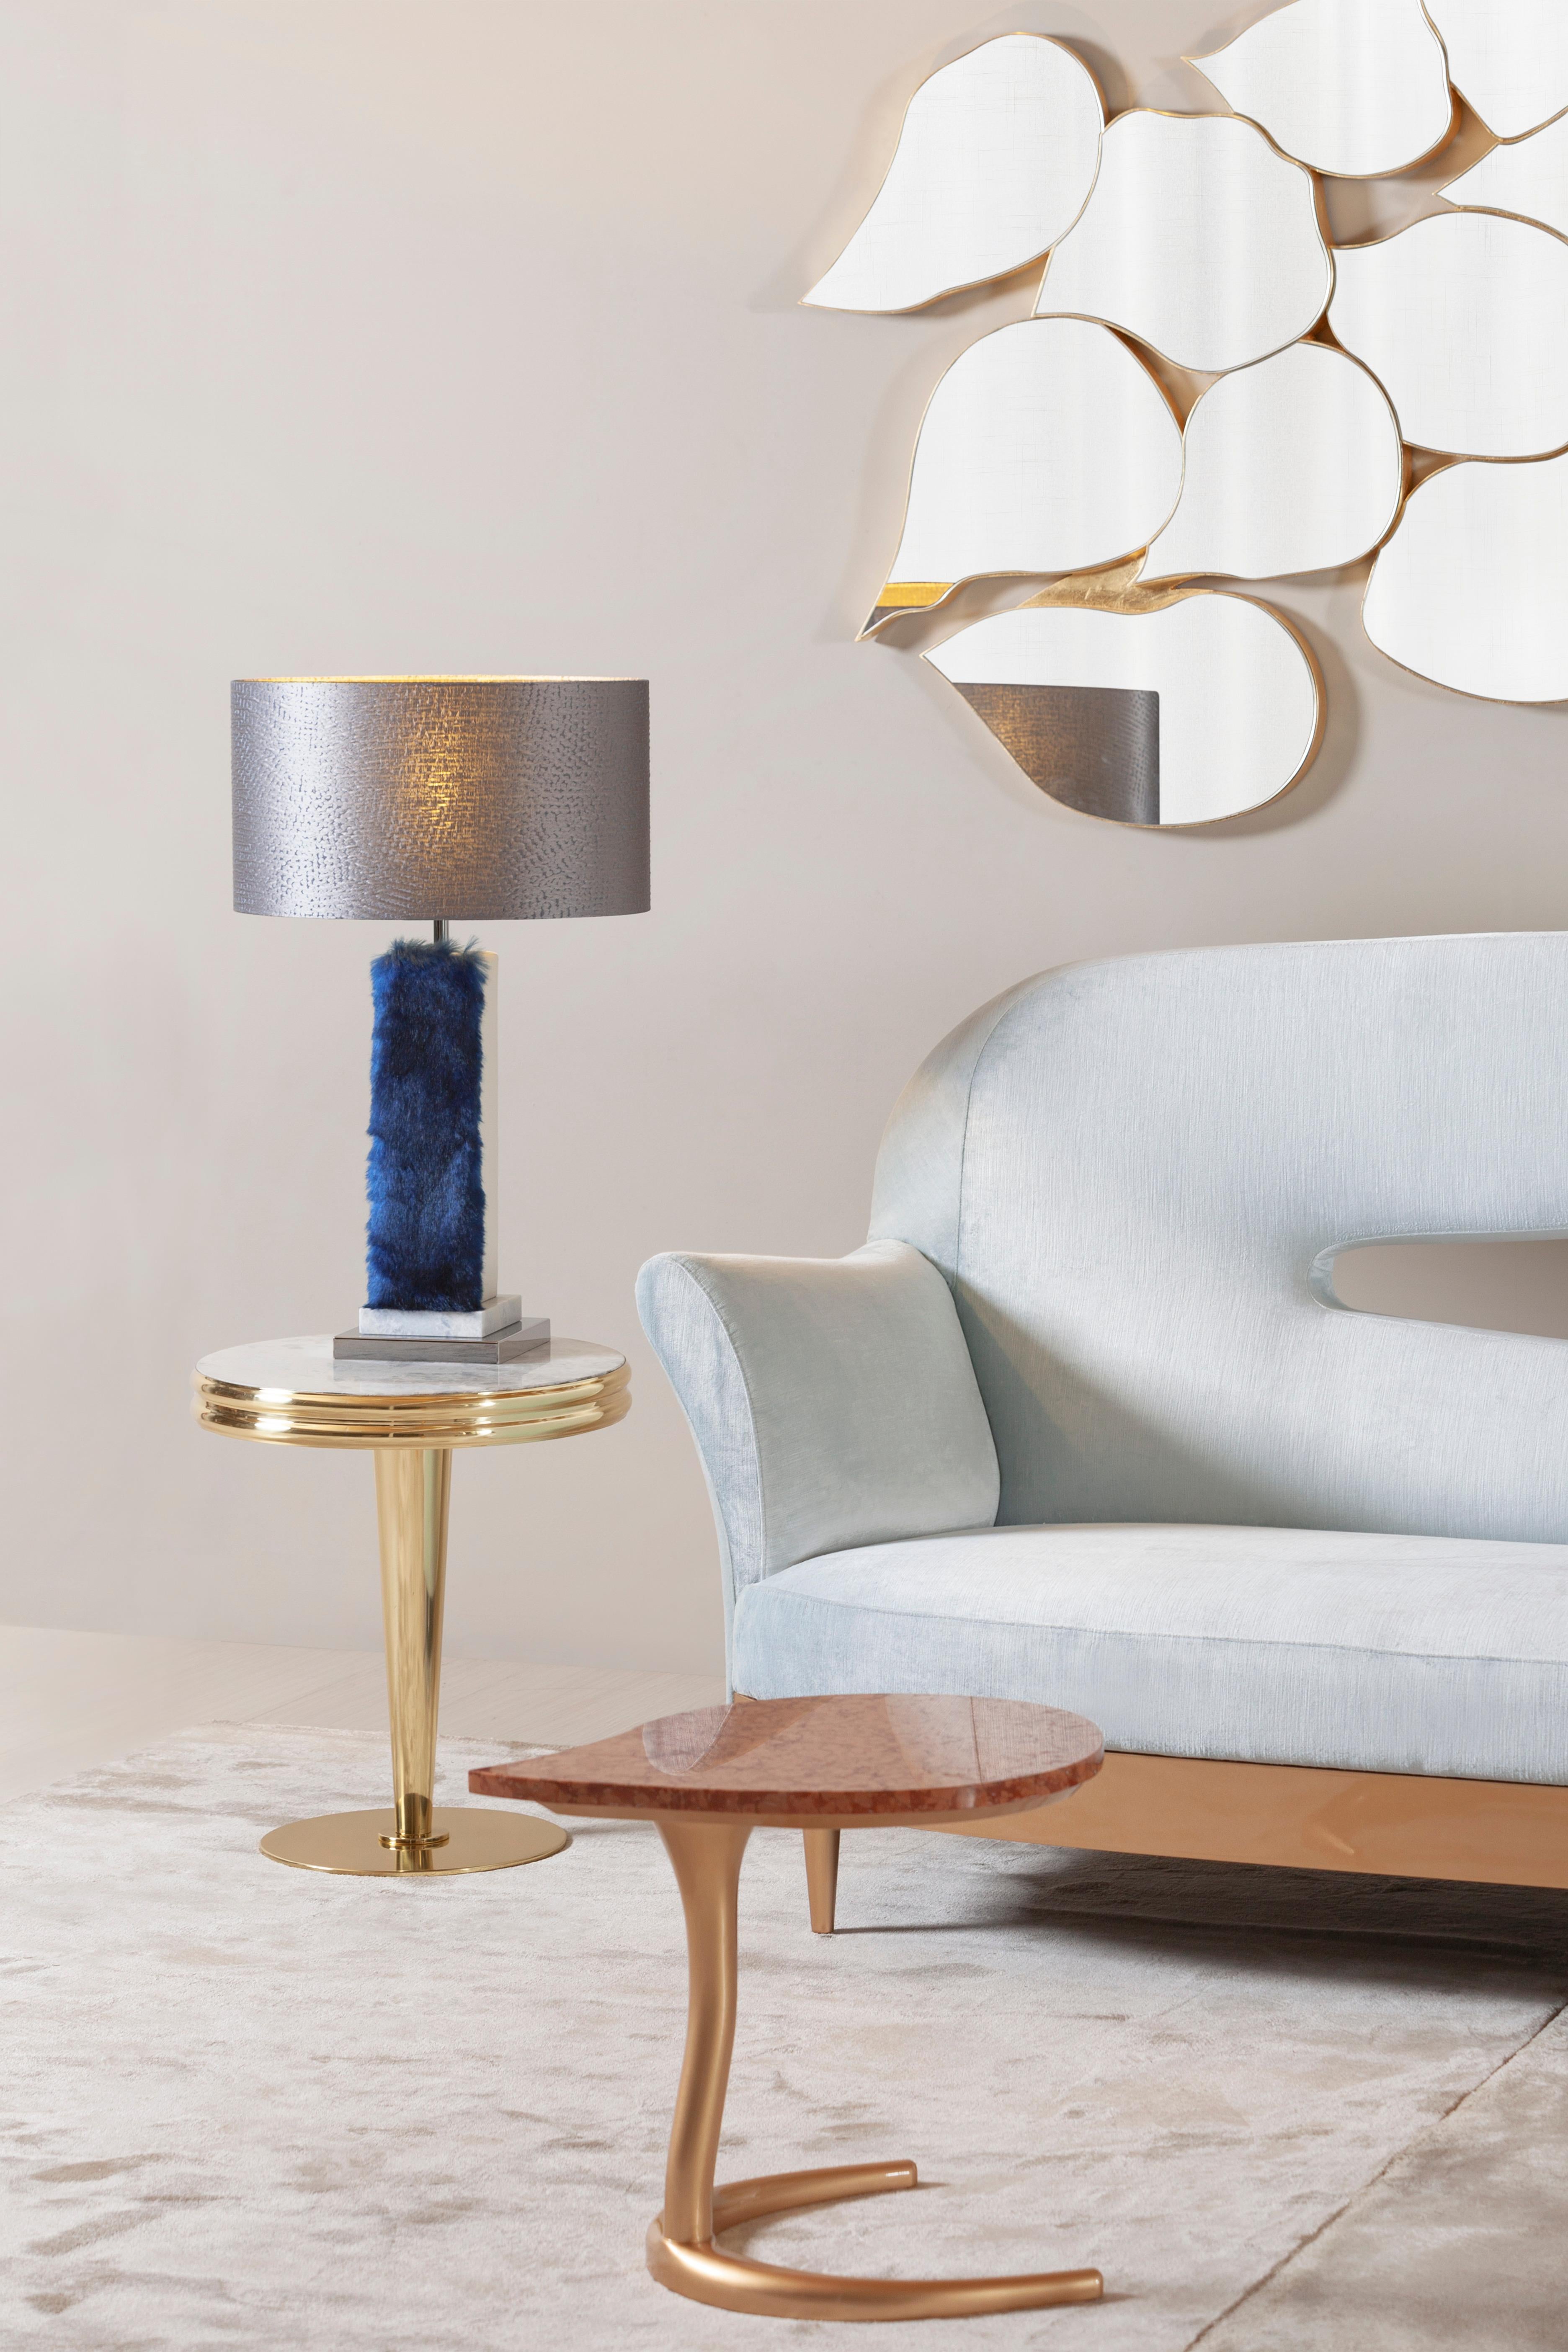 Set of 2 Simões table lamps, modern collection, handcrafted in Portugal - Europe by GF Modern.

Simões is an elegant table lamp and an attractive addition to a modern home. The Blue Crystal marble and stainless steel gracefully combine with the blue